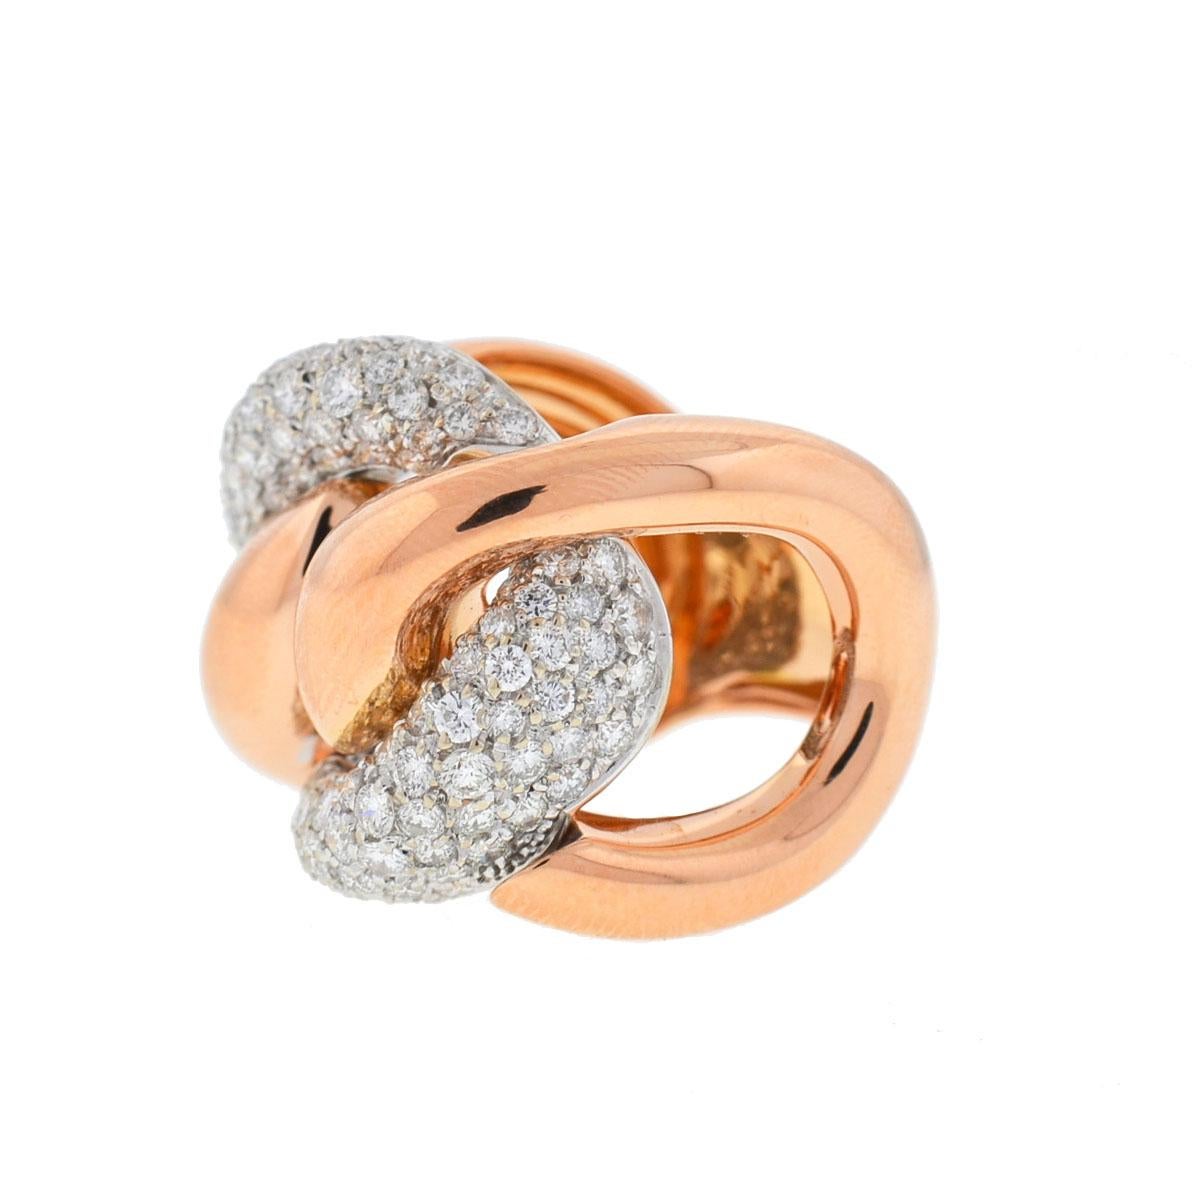 Style-Pave Diamond Free Form Rings 
Metal-18k Rose Gold
Size-7
Weight -22.79 grams
Stones-Diamonds - Pave Approx. 22.79 TCW

